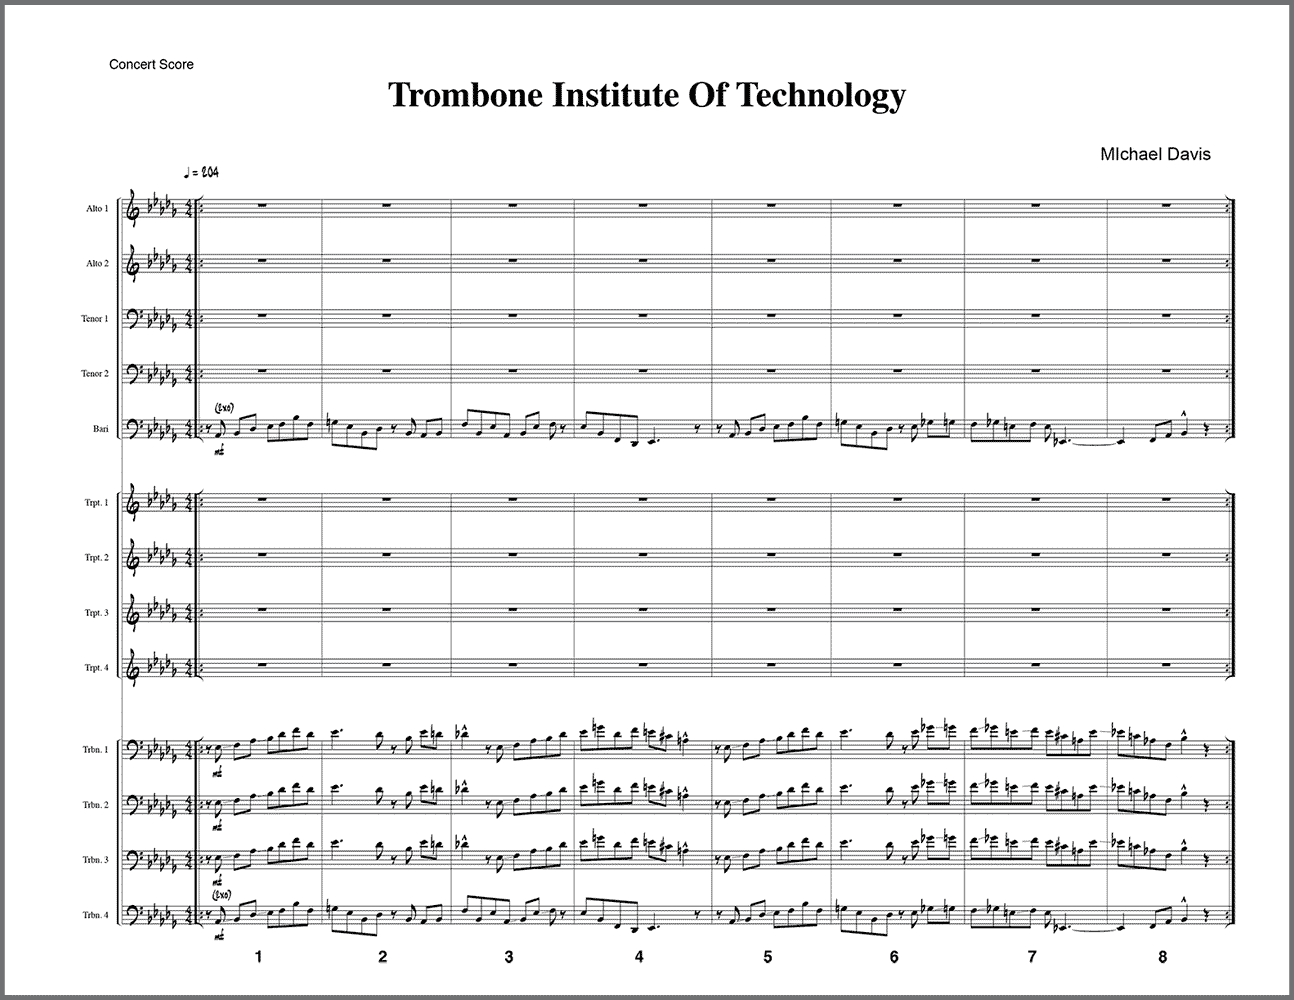 Trombone Institute of Technology for big band